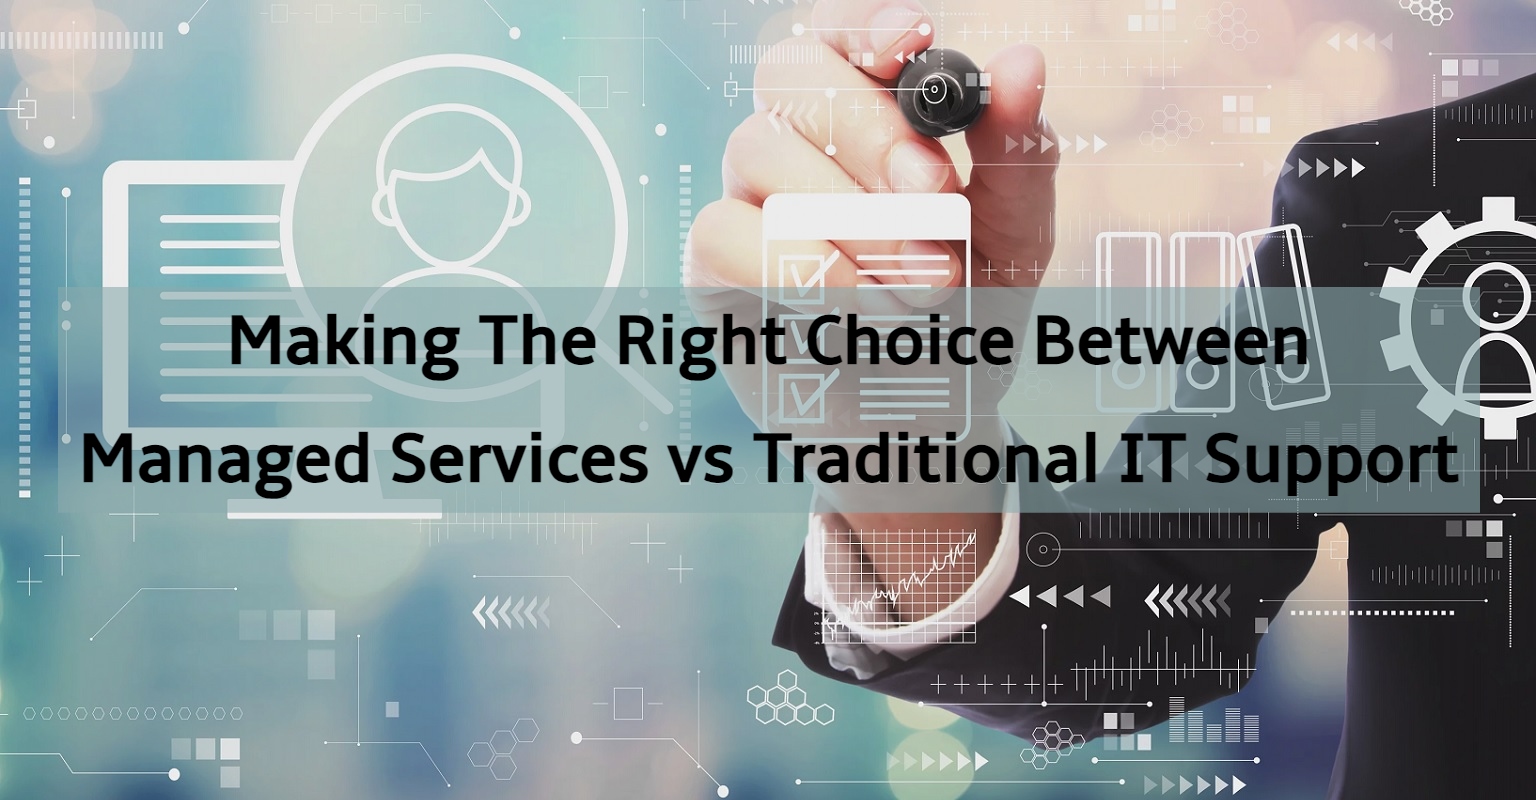 Managed Services vs Traditional IT Support